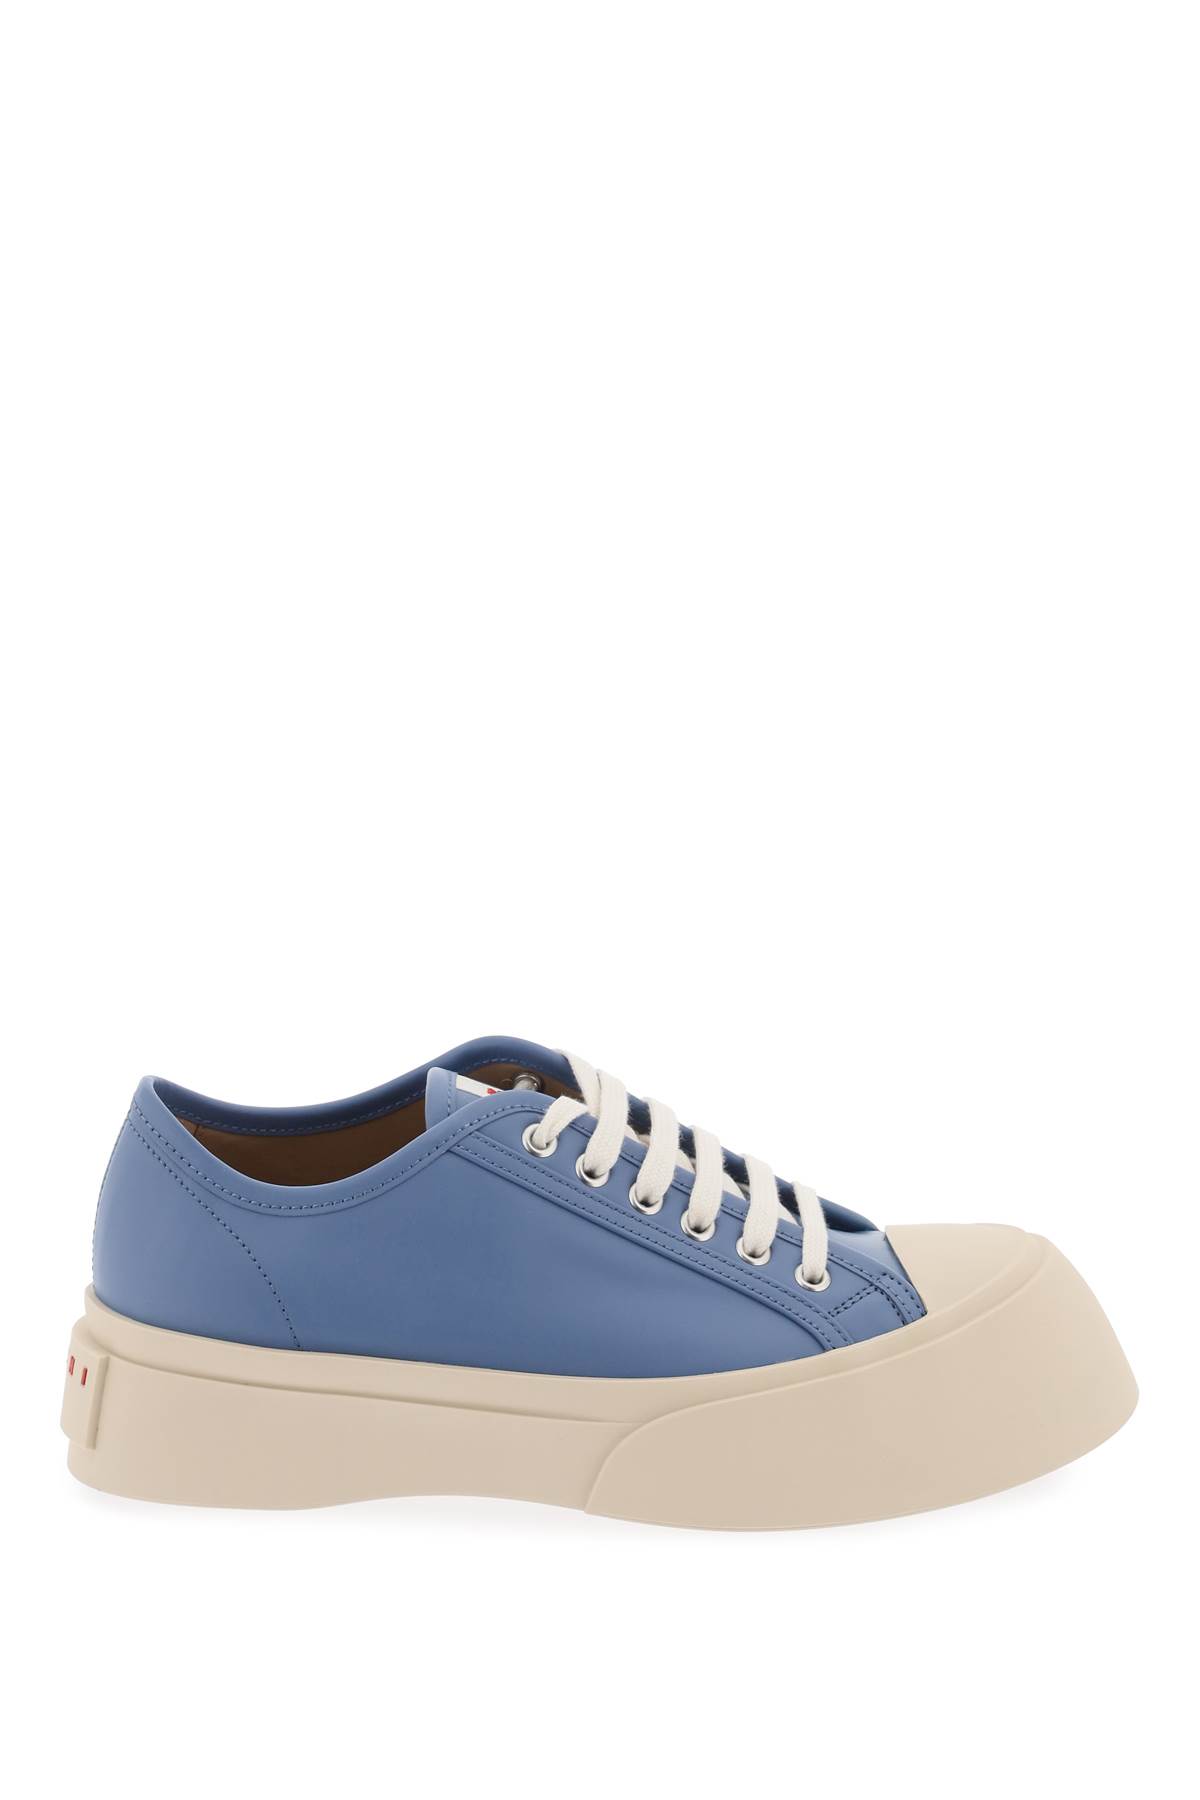 Shop Marni Leather Pablo Sneakers In Gnawed Blue